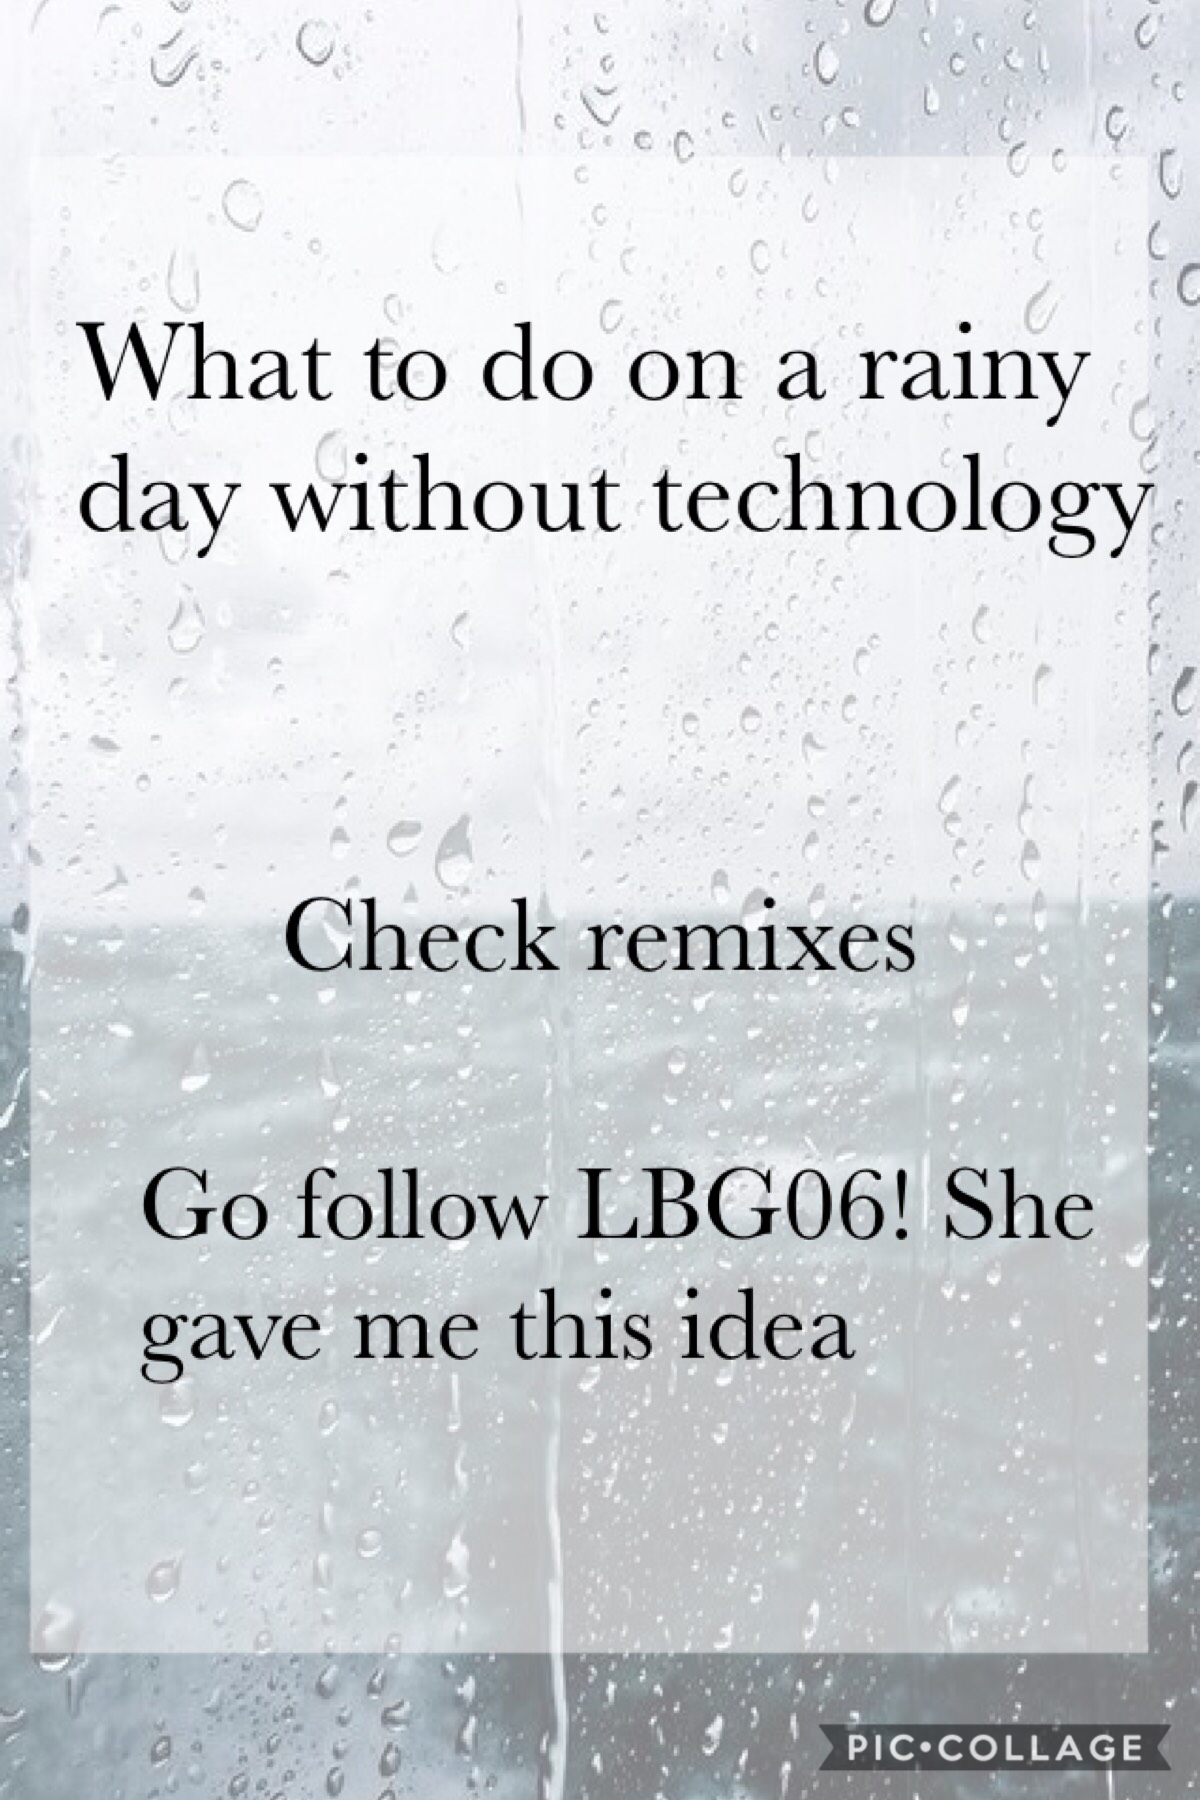 🌧 Tap 🌧 
She gave me a great idea for a rainy day without tech. Often if there’s a storm we get stuck inside and sometimes wifi stops working.